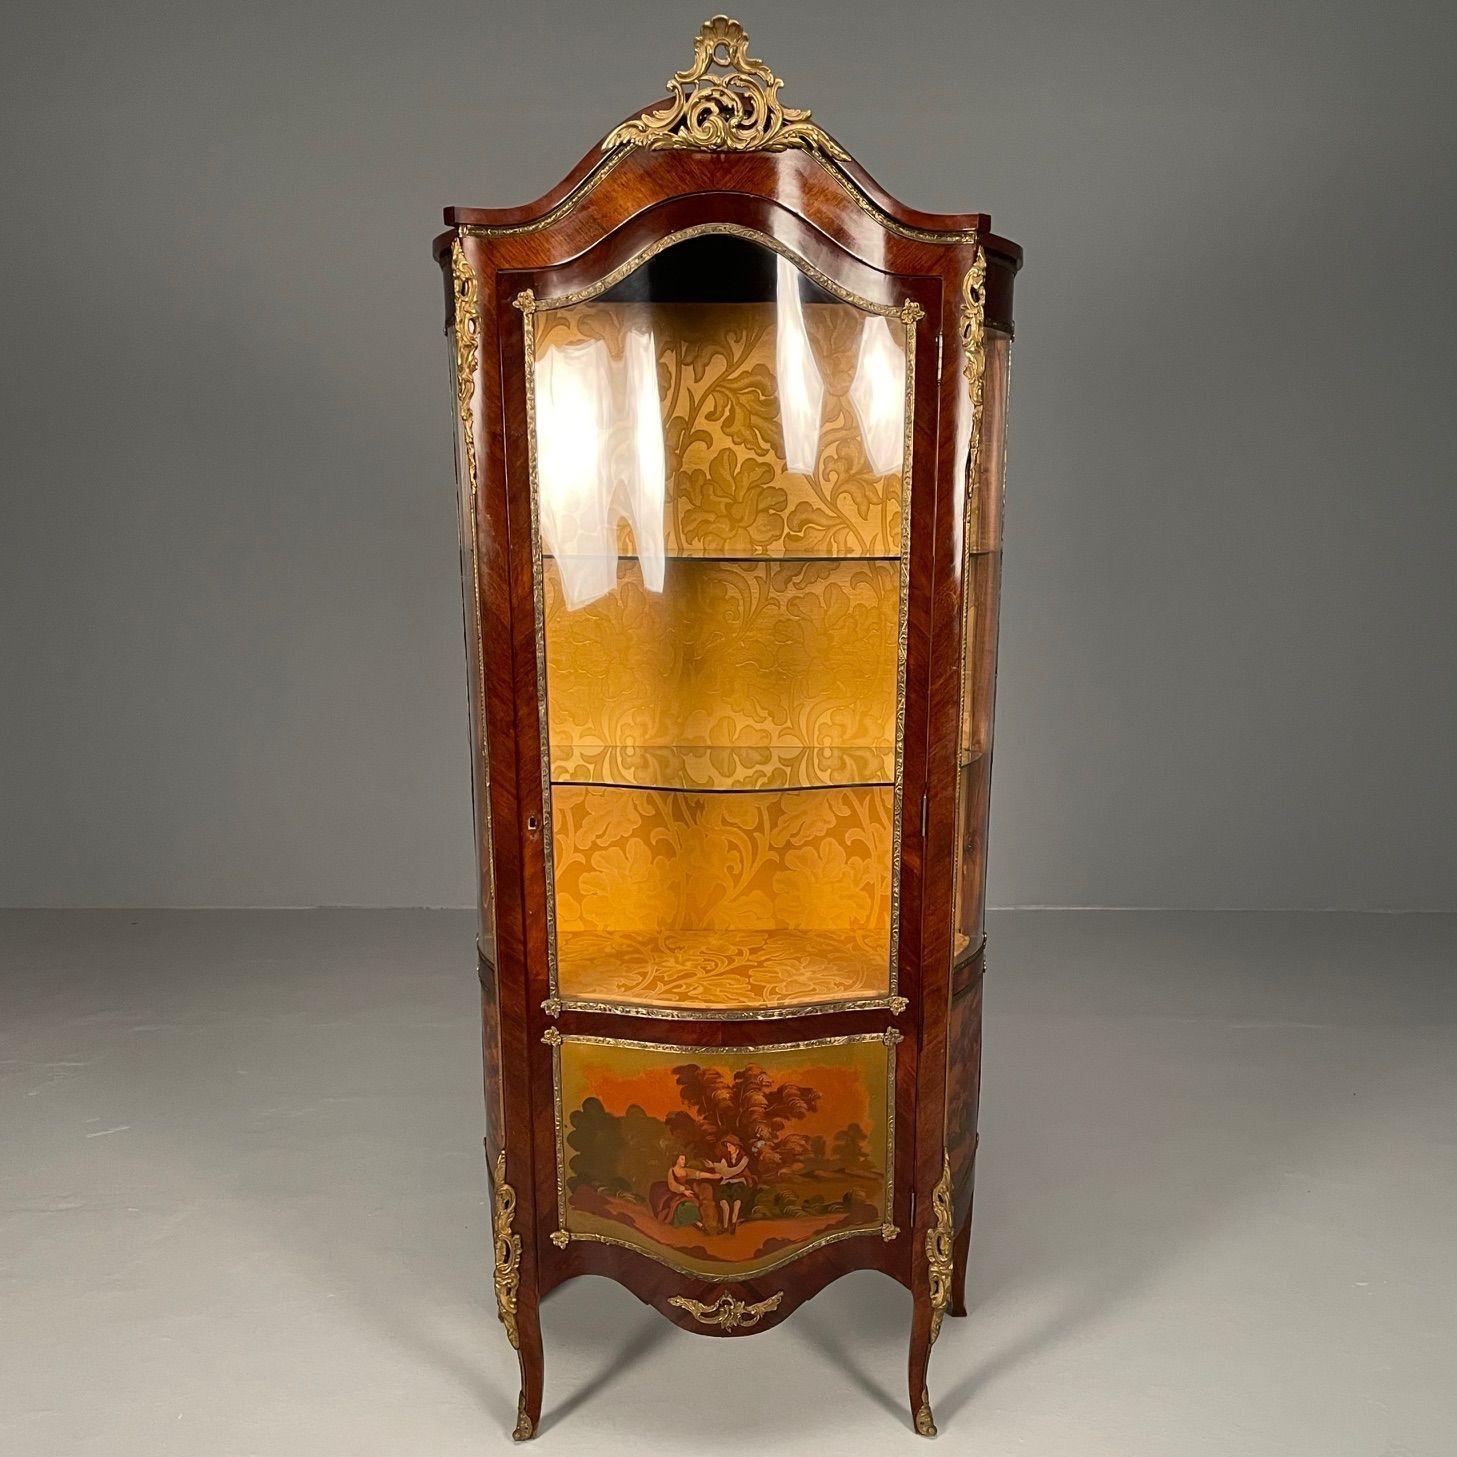 Reproduction Bombe Louis XV Vitrine / Curio Cabinet, Vernis Martin Painted Scene

A decorative reproduction Louis XV Style Vitrine or Curio Cabinet having a bombe form with bronze mounts and Vernis Martin scenes.

This consignment item is priced to